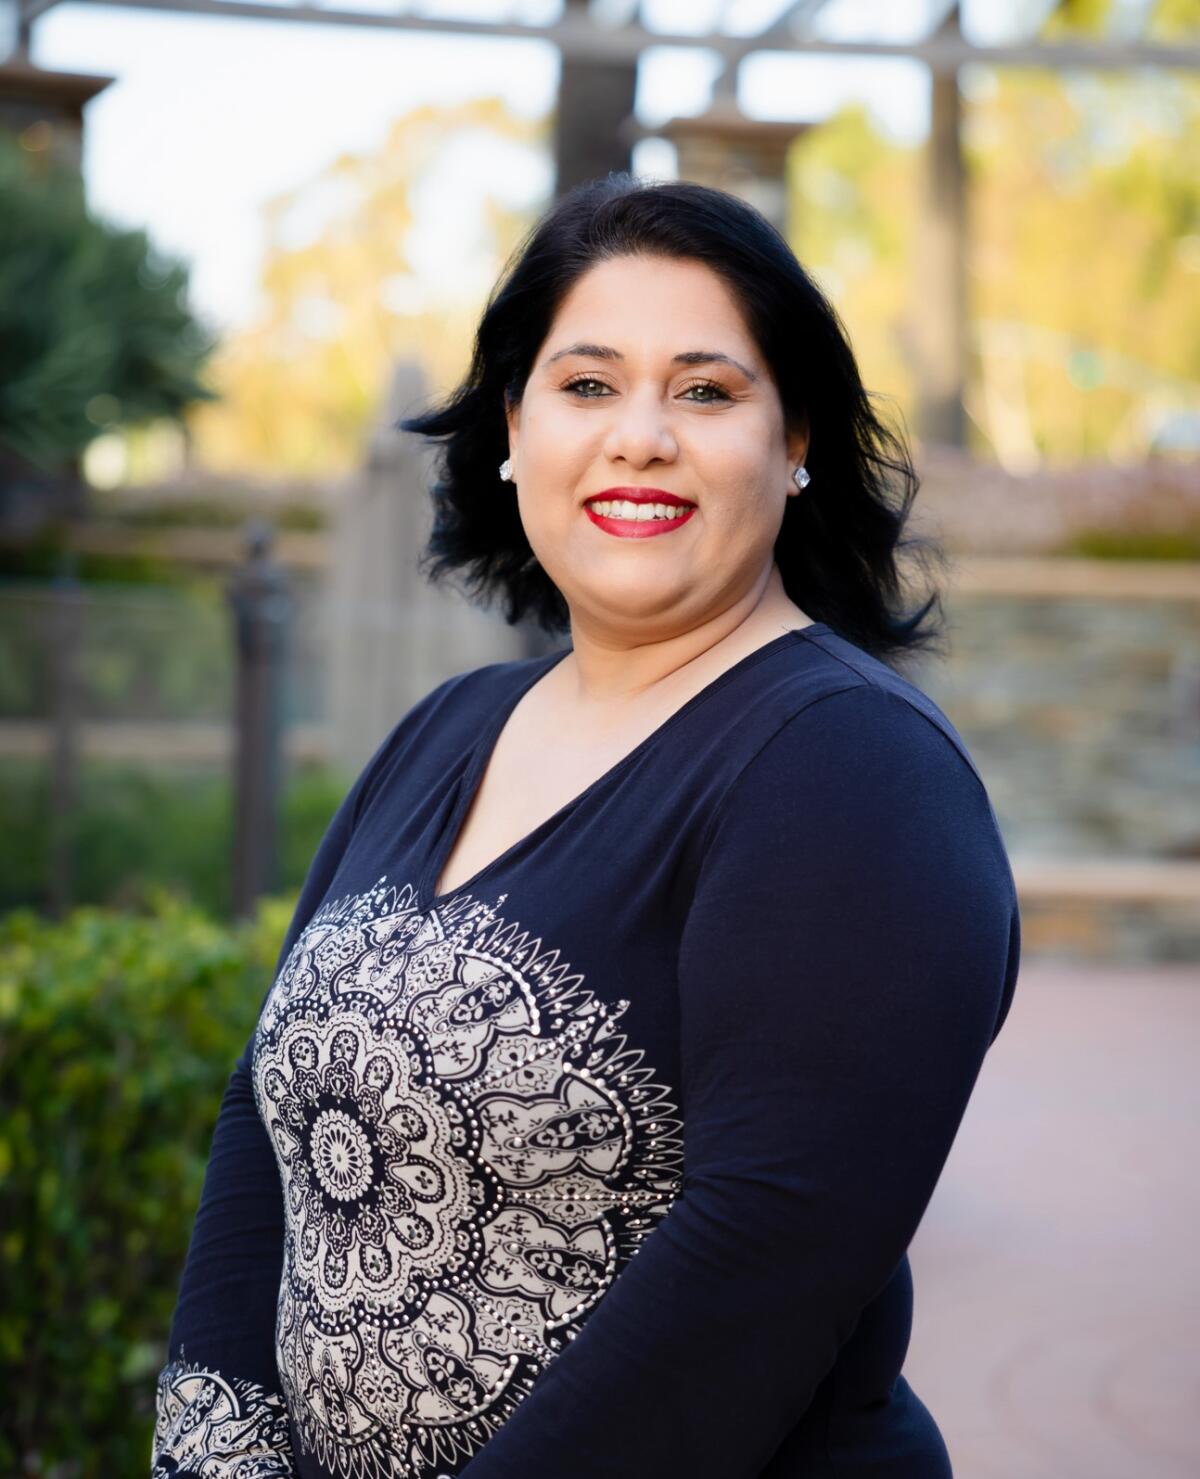 Costa Mesa Republican Hengameh "Henny" Abraham has announced her candidacy in California's 73rd Assembly District in 2024.